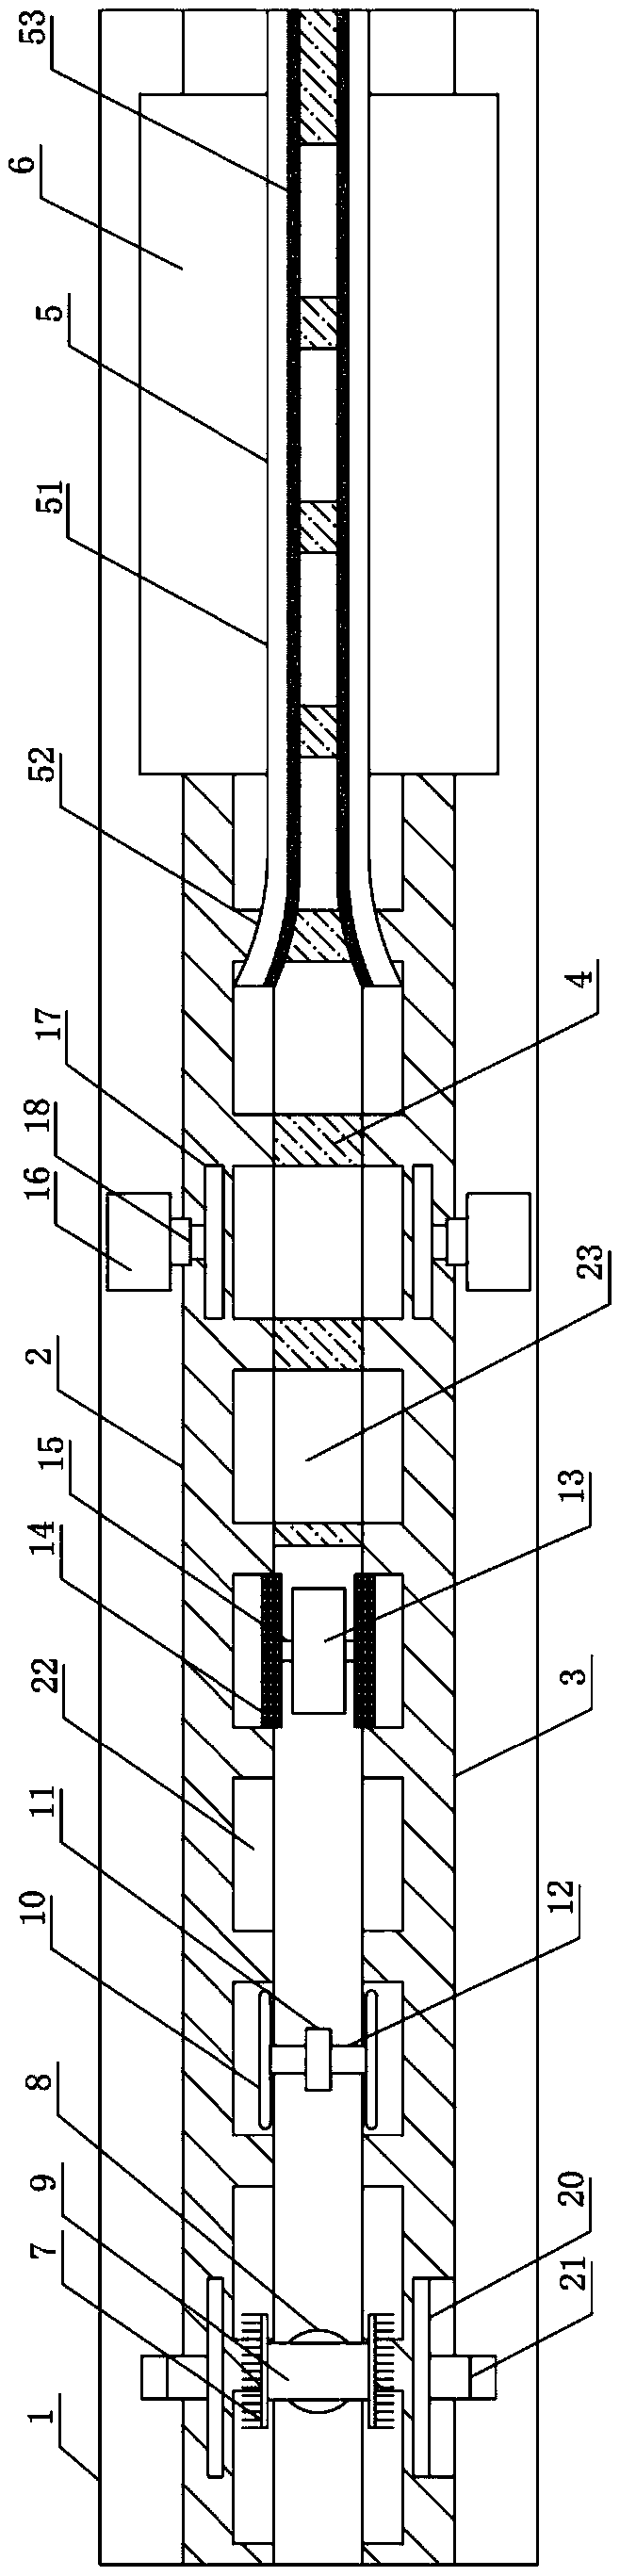 A continuous gluing device for bamboo and wood composite rods